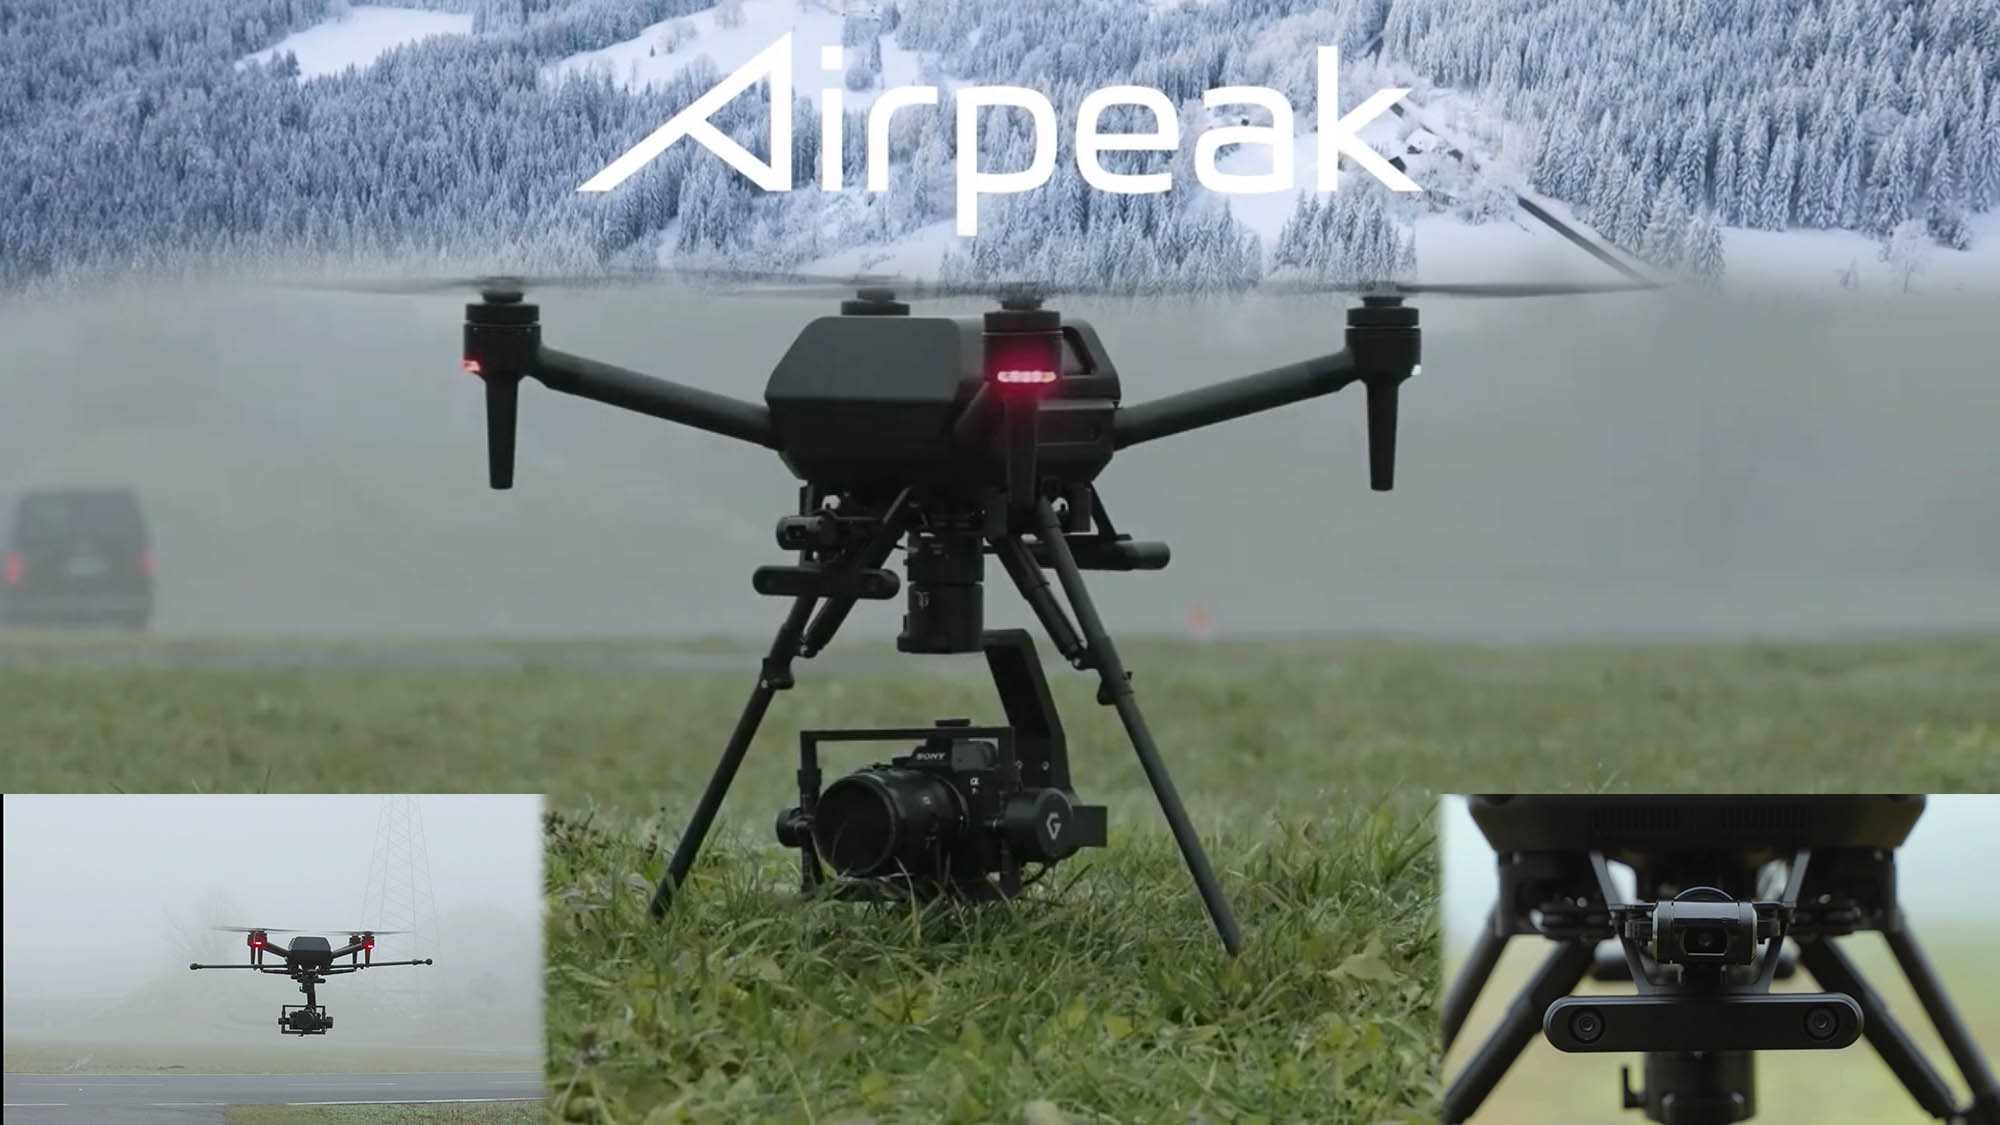 ANTES DE CRISTO. vocal Verter Sony Airpeak Drone, the newest robust DJI rival. - Drone U™